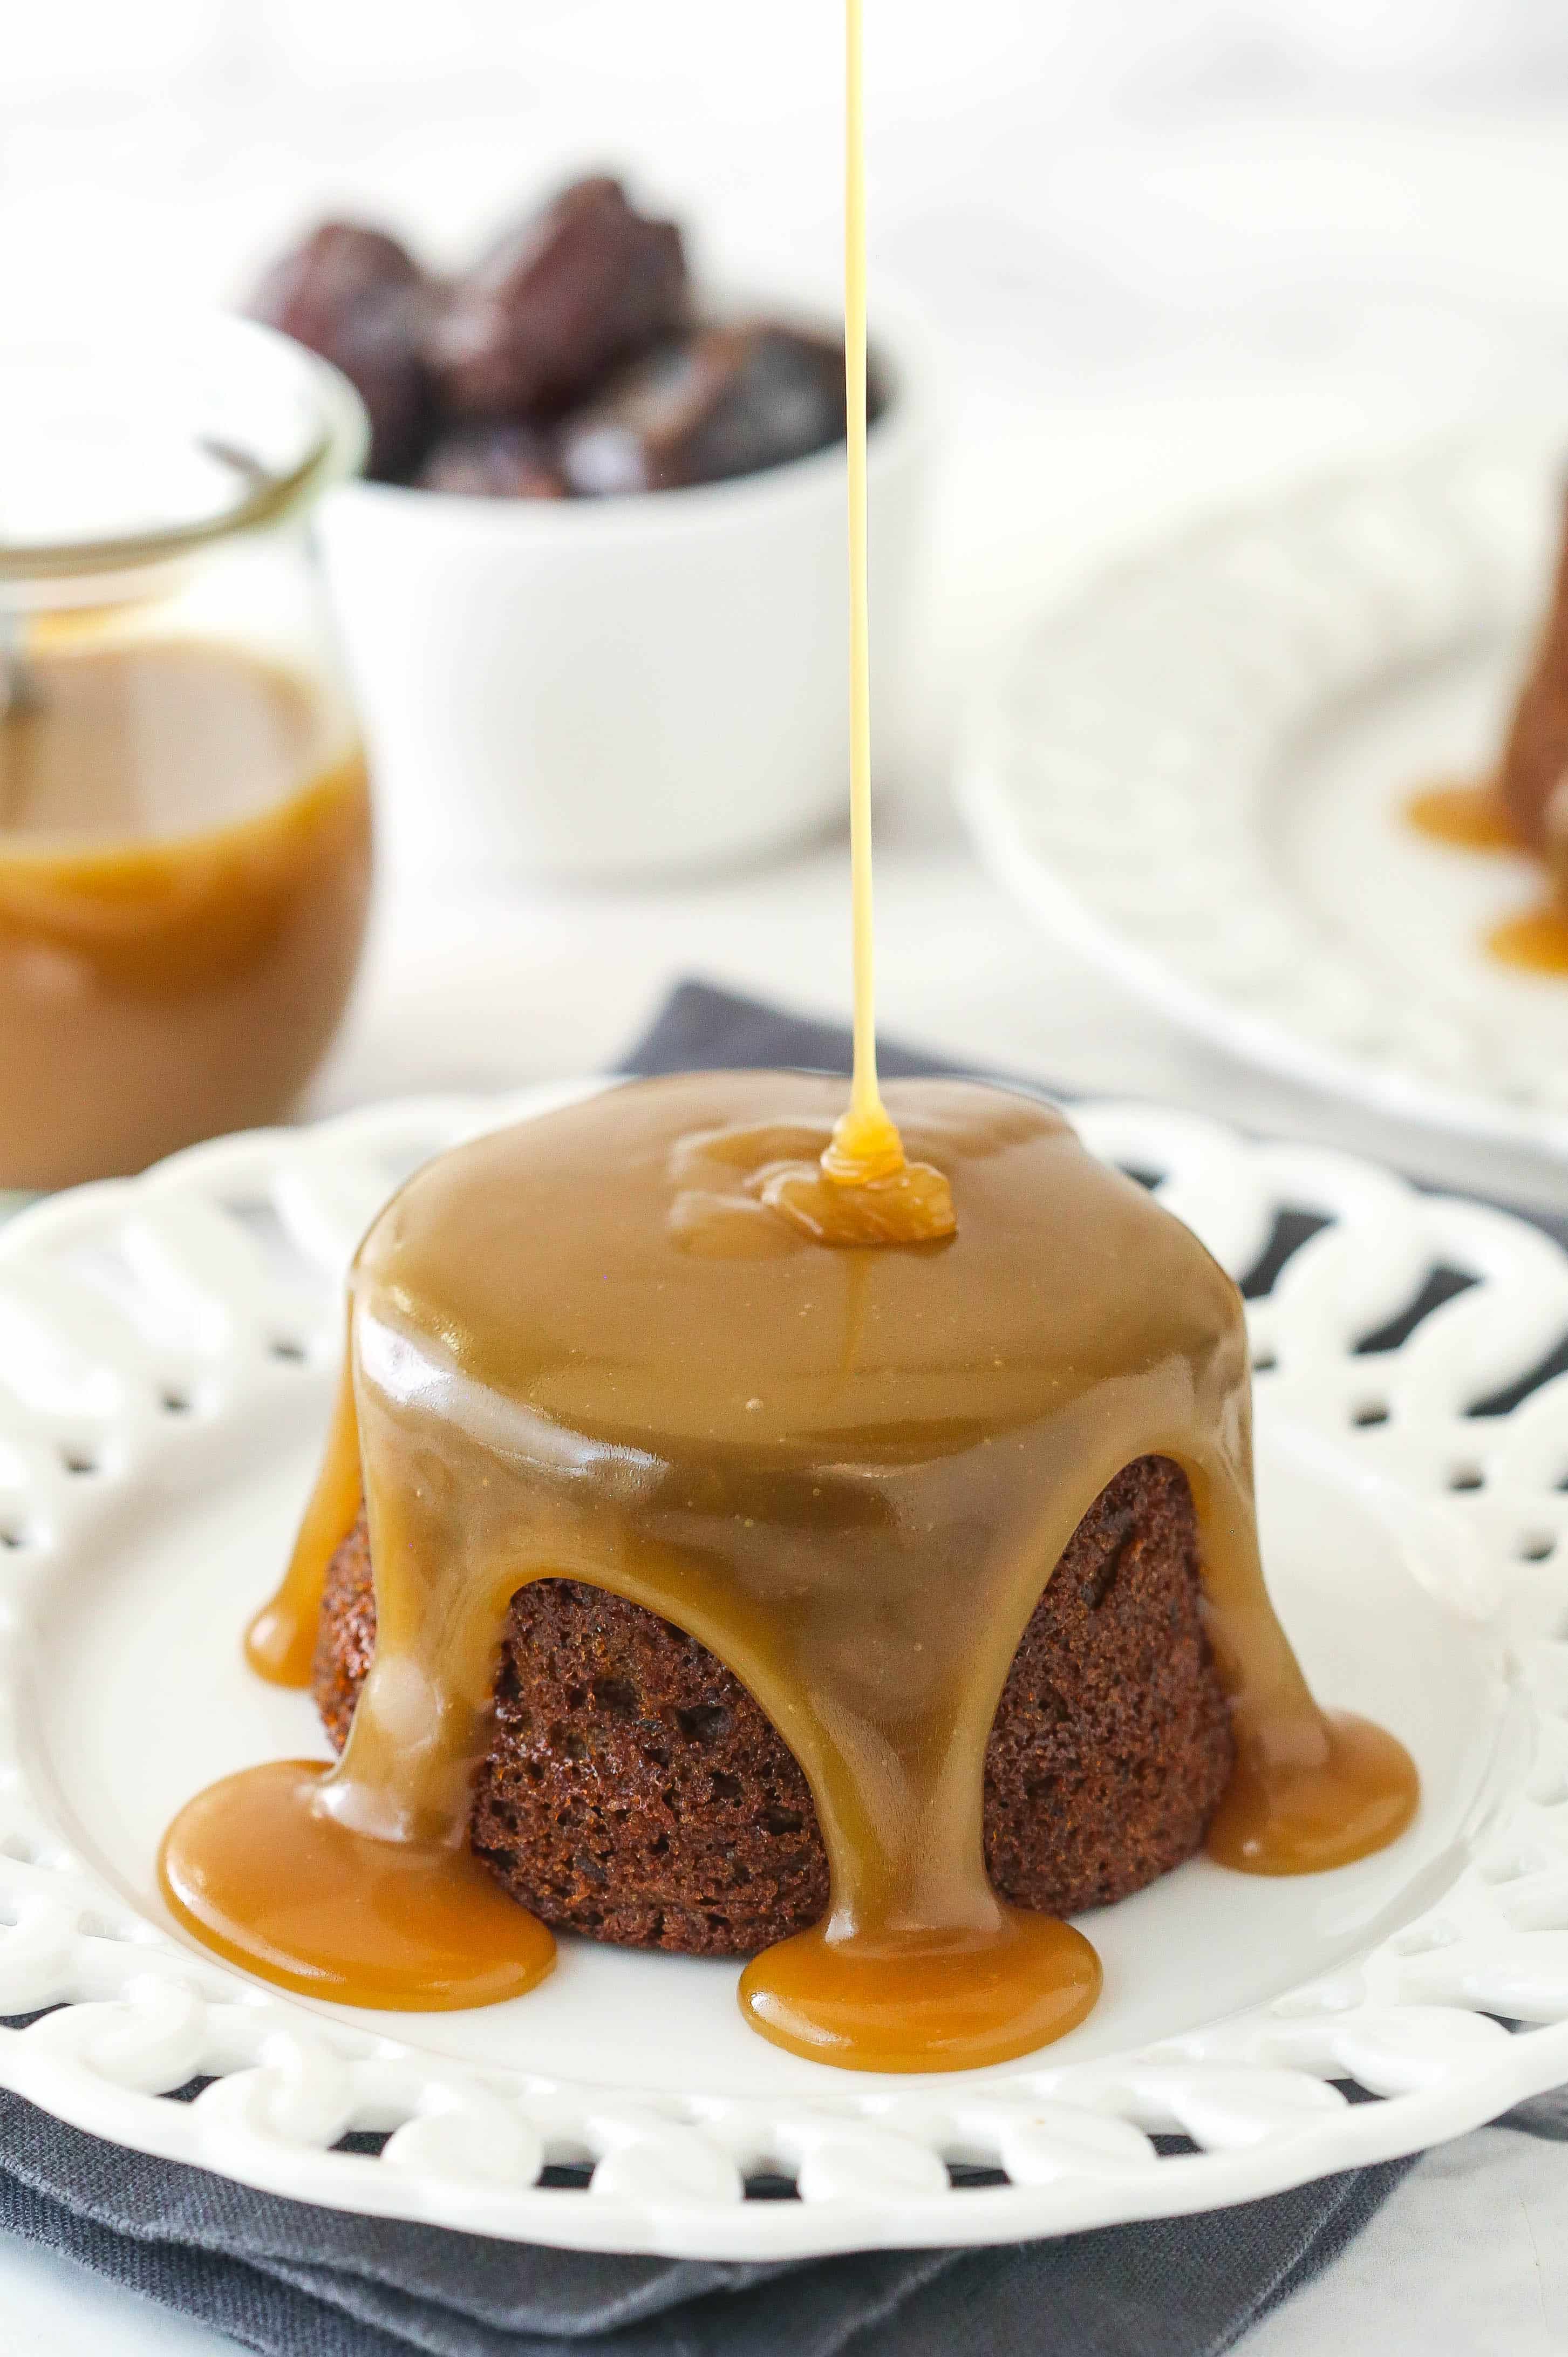 Drizzling toffee sauce over the cake